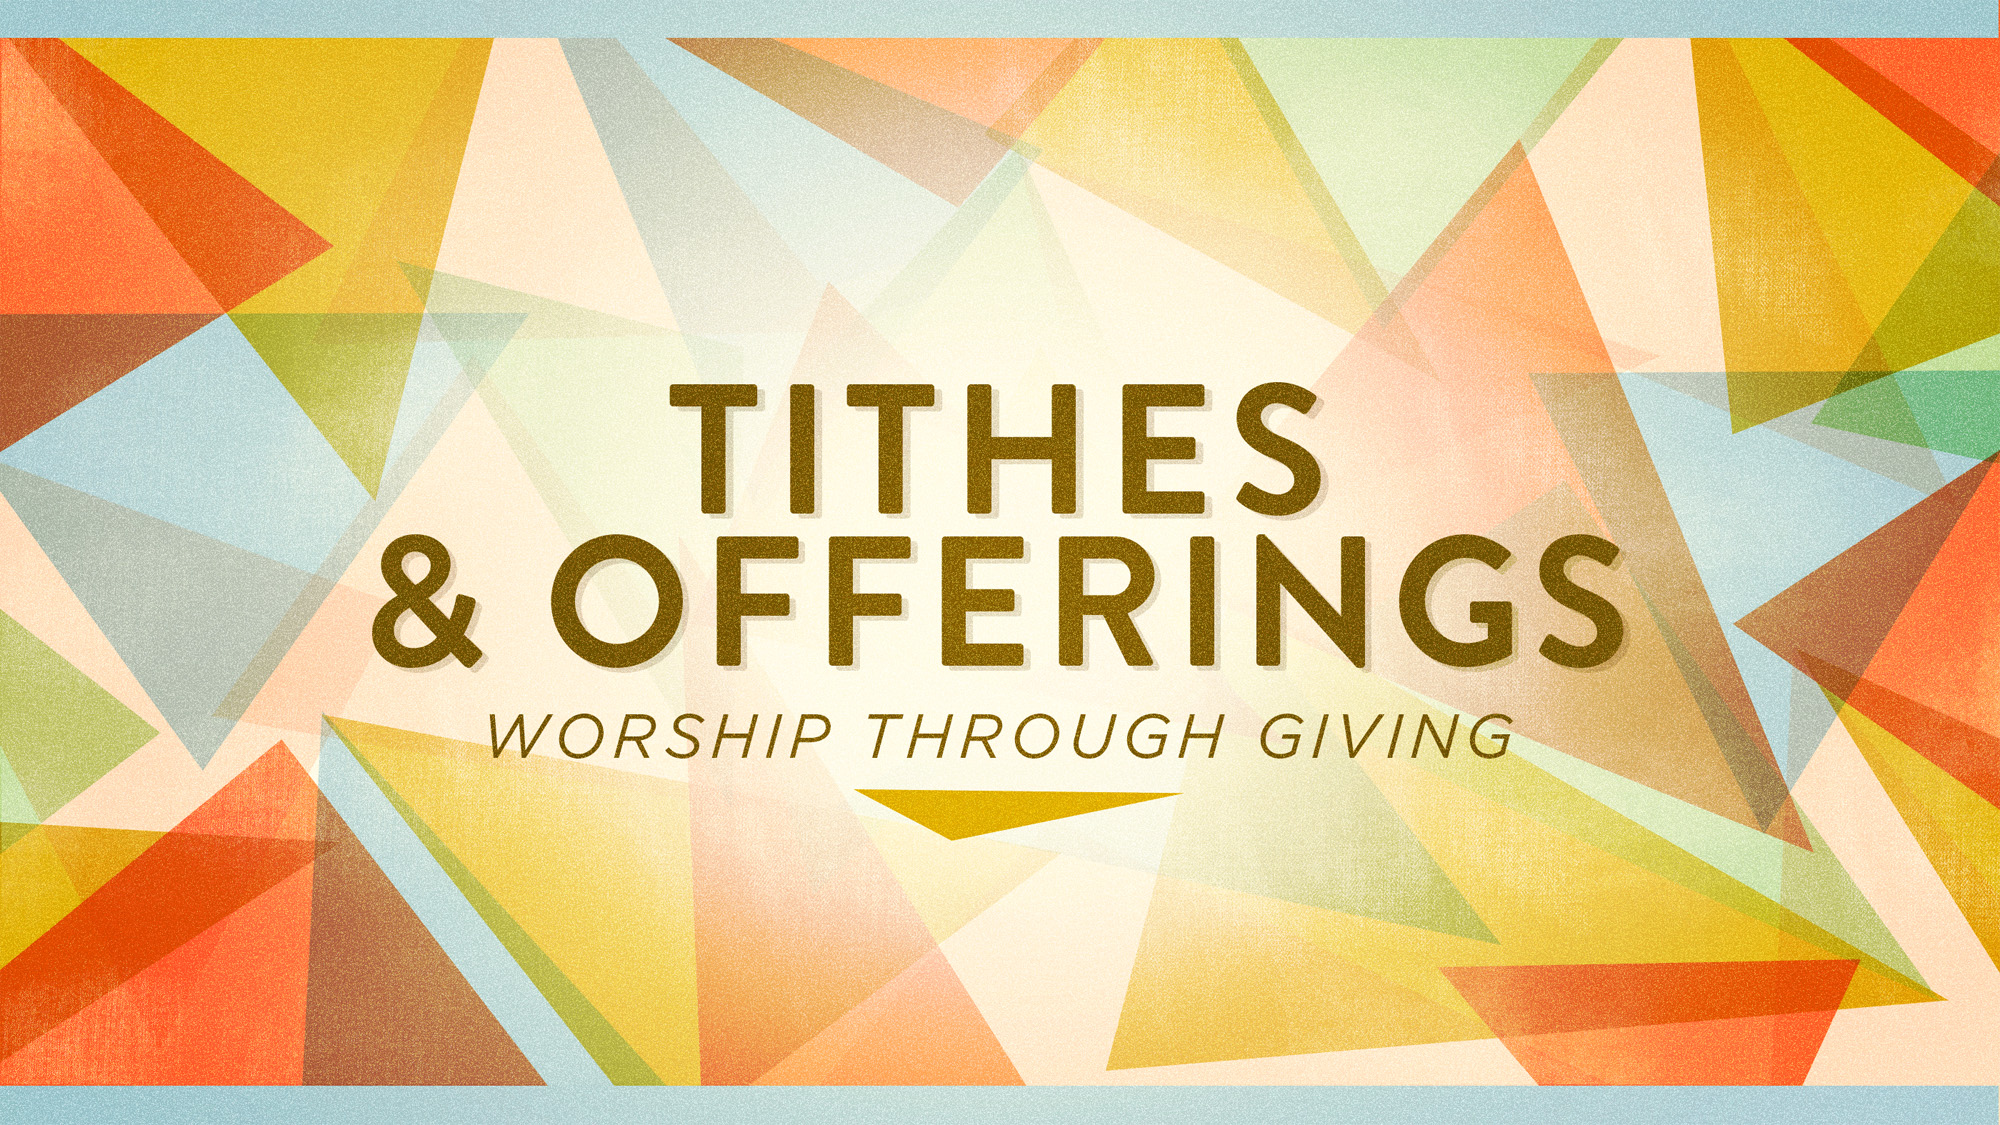 tithes-and-offerings-1.jpg